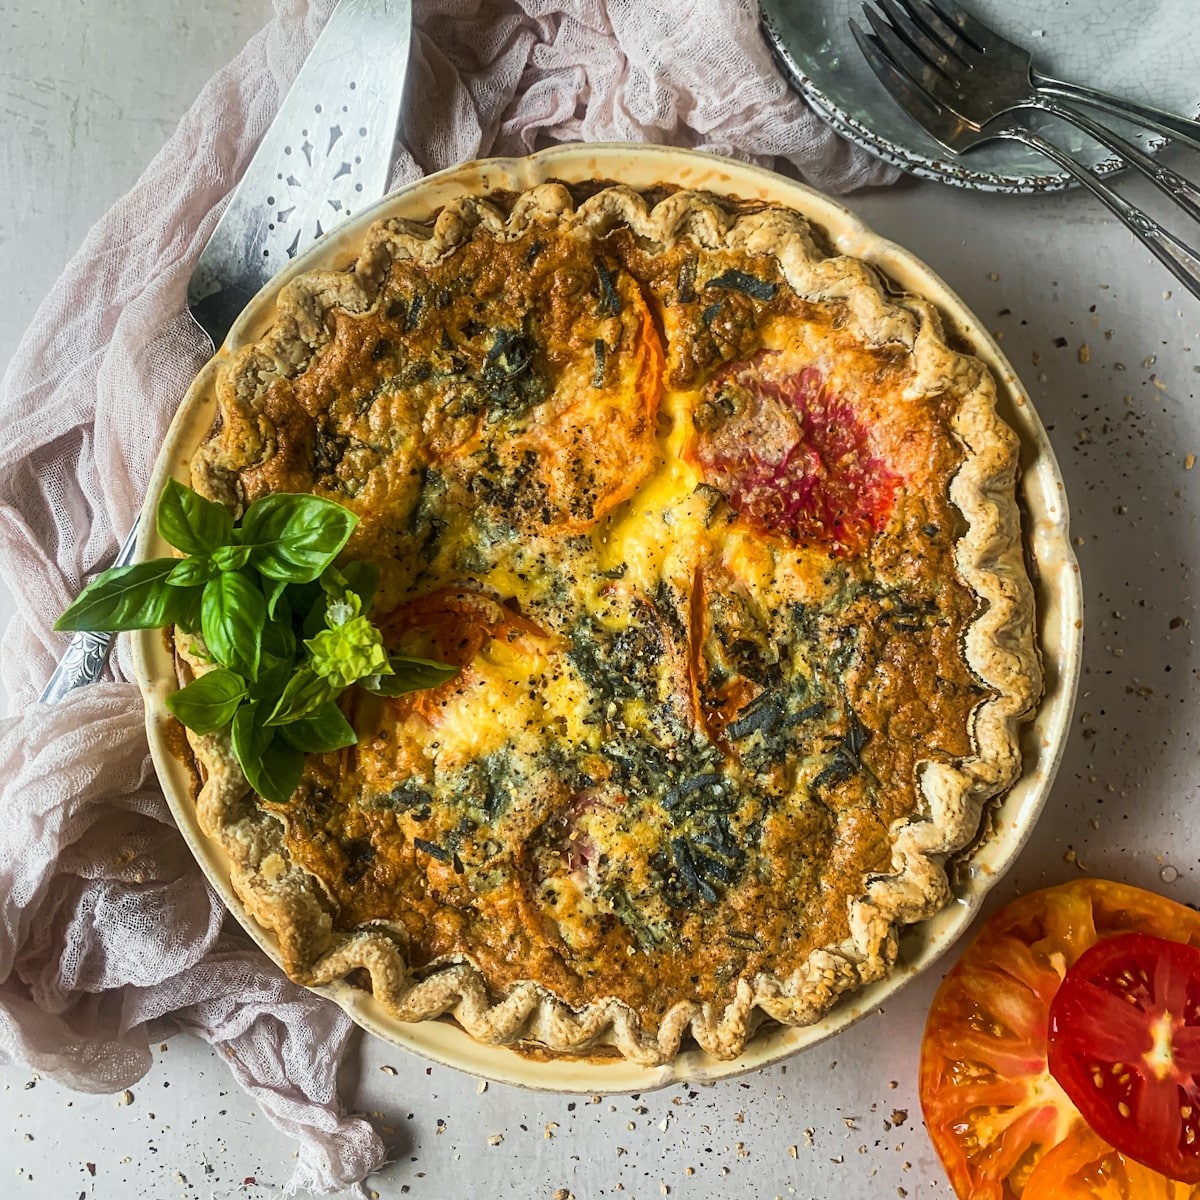 Whole tomato quiche in a pie plate with tomatoes and basil.